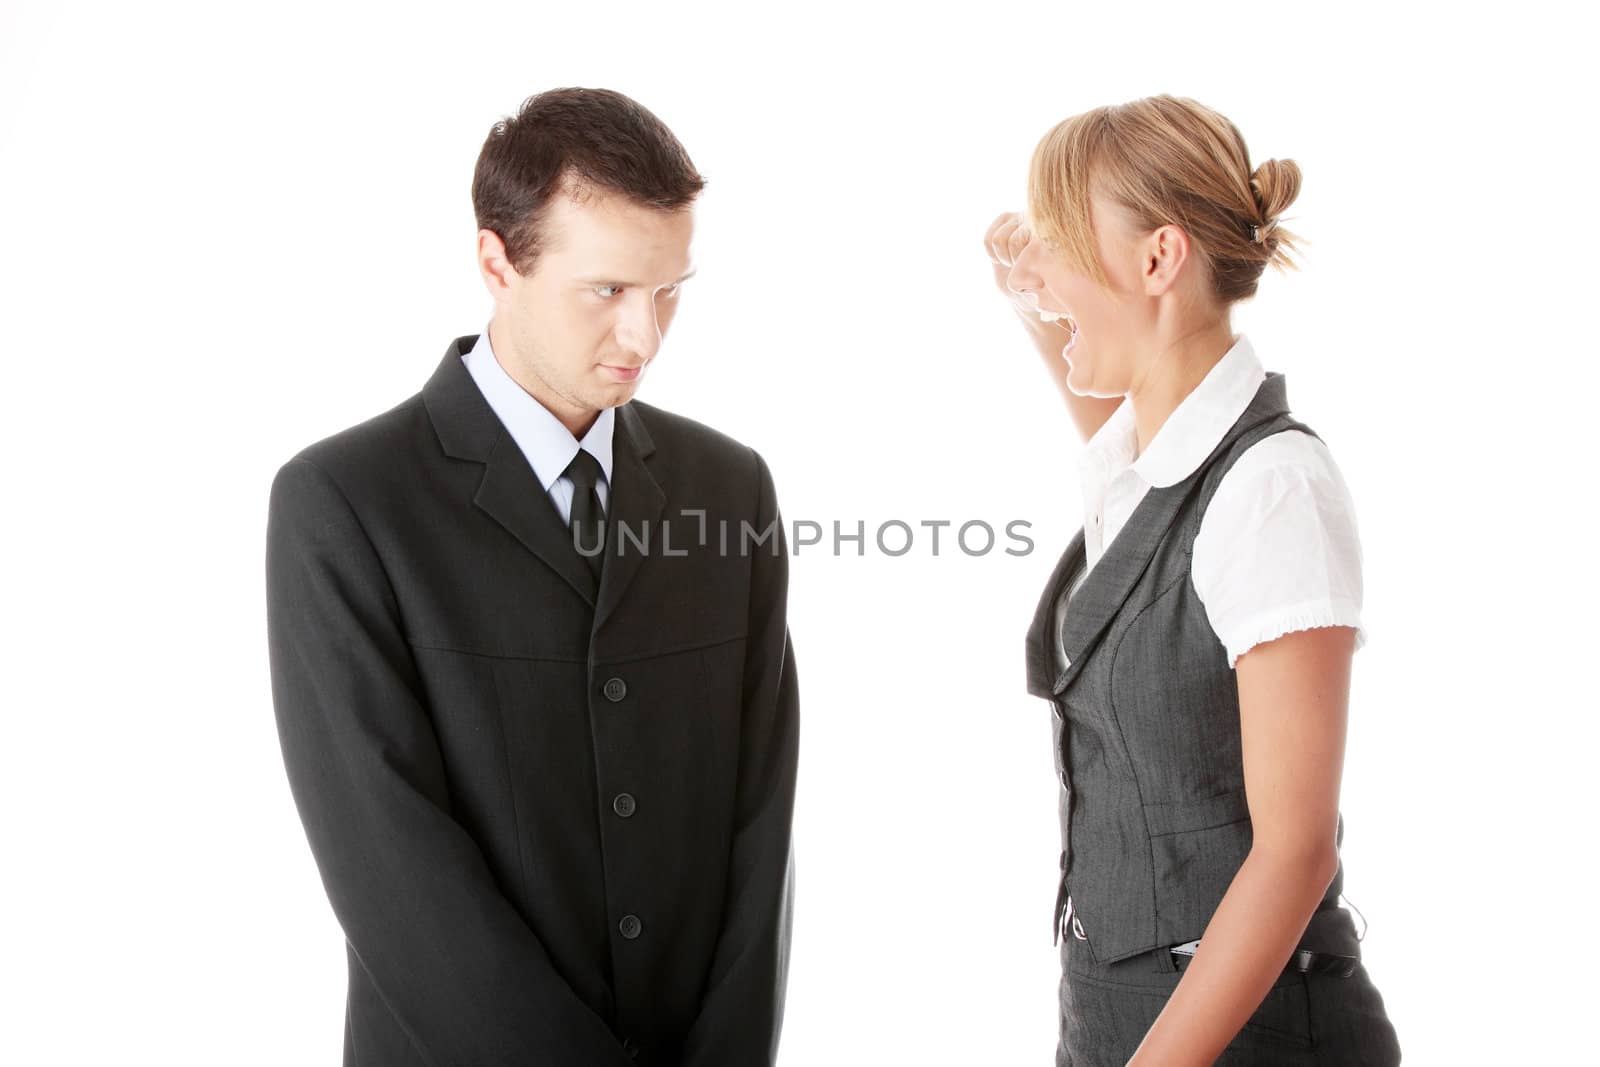 Work Colleagues arguing on white background